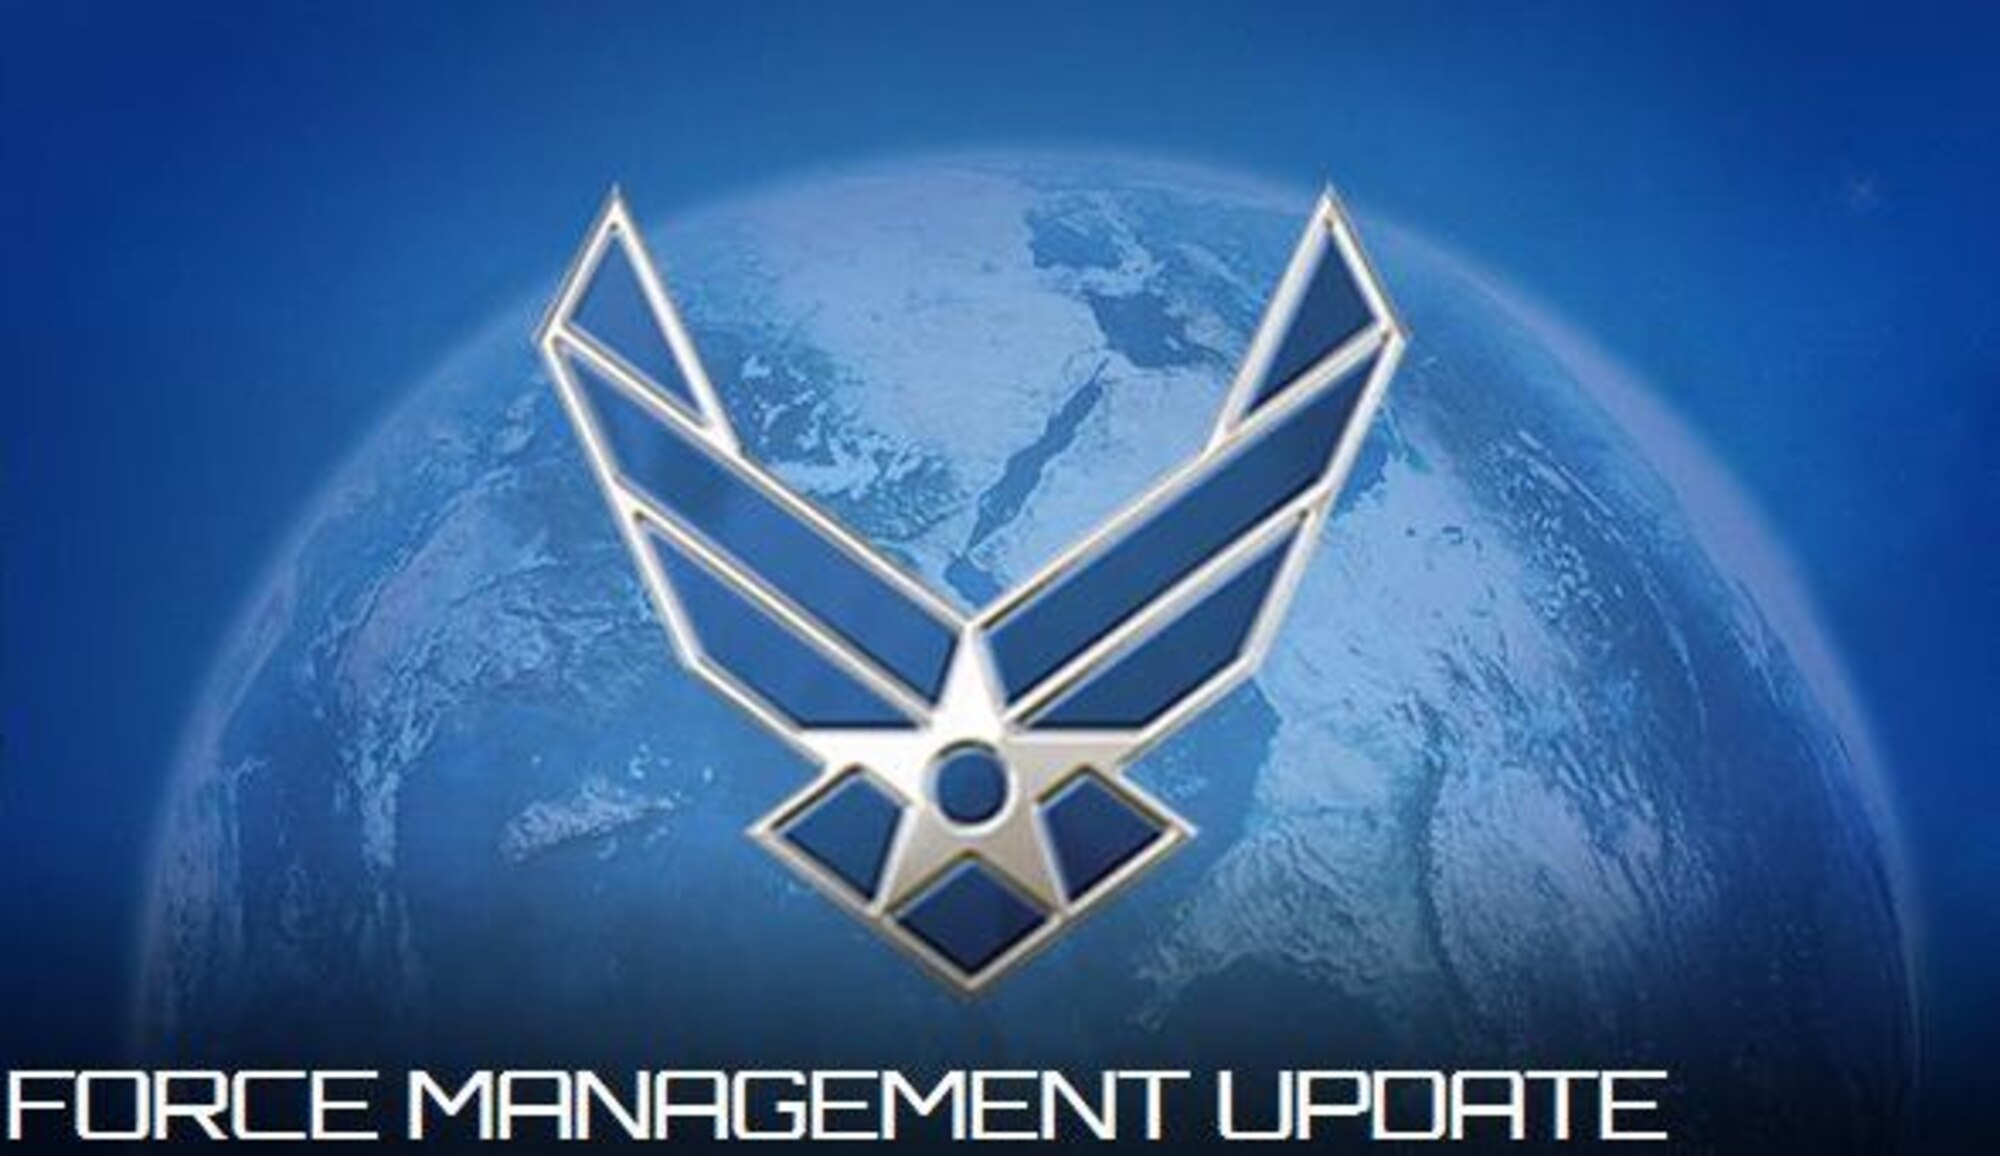 Air Force continues force management programs (U.S. Air Force graphic)